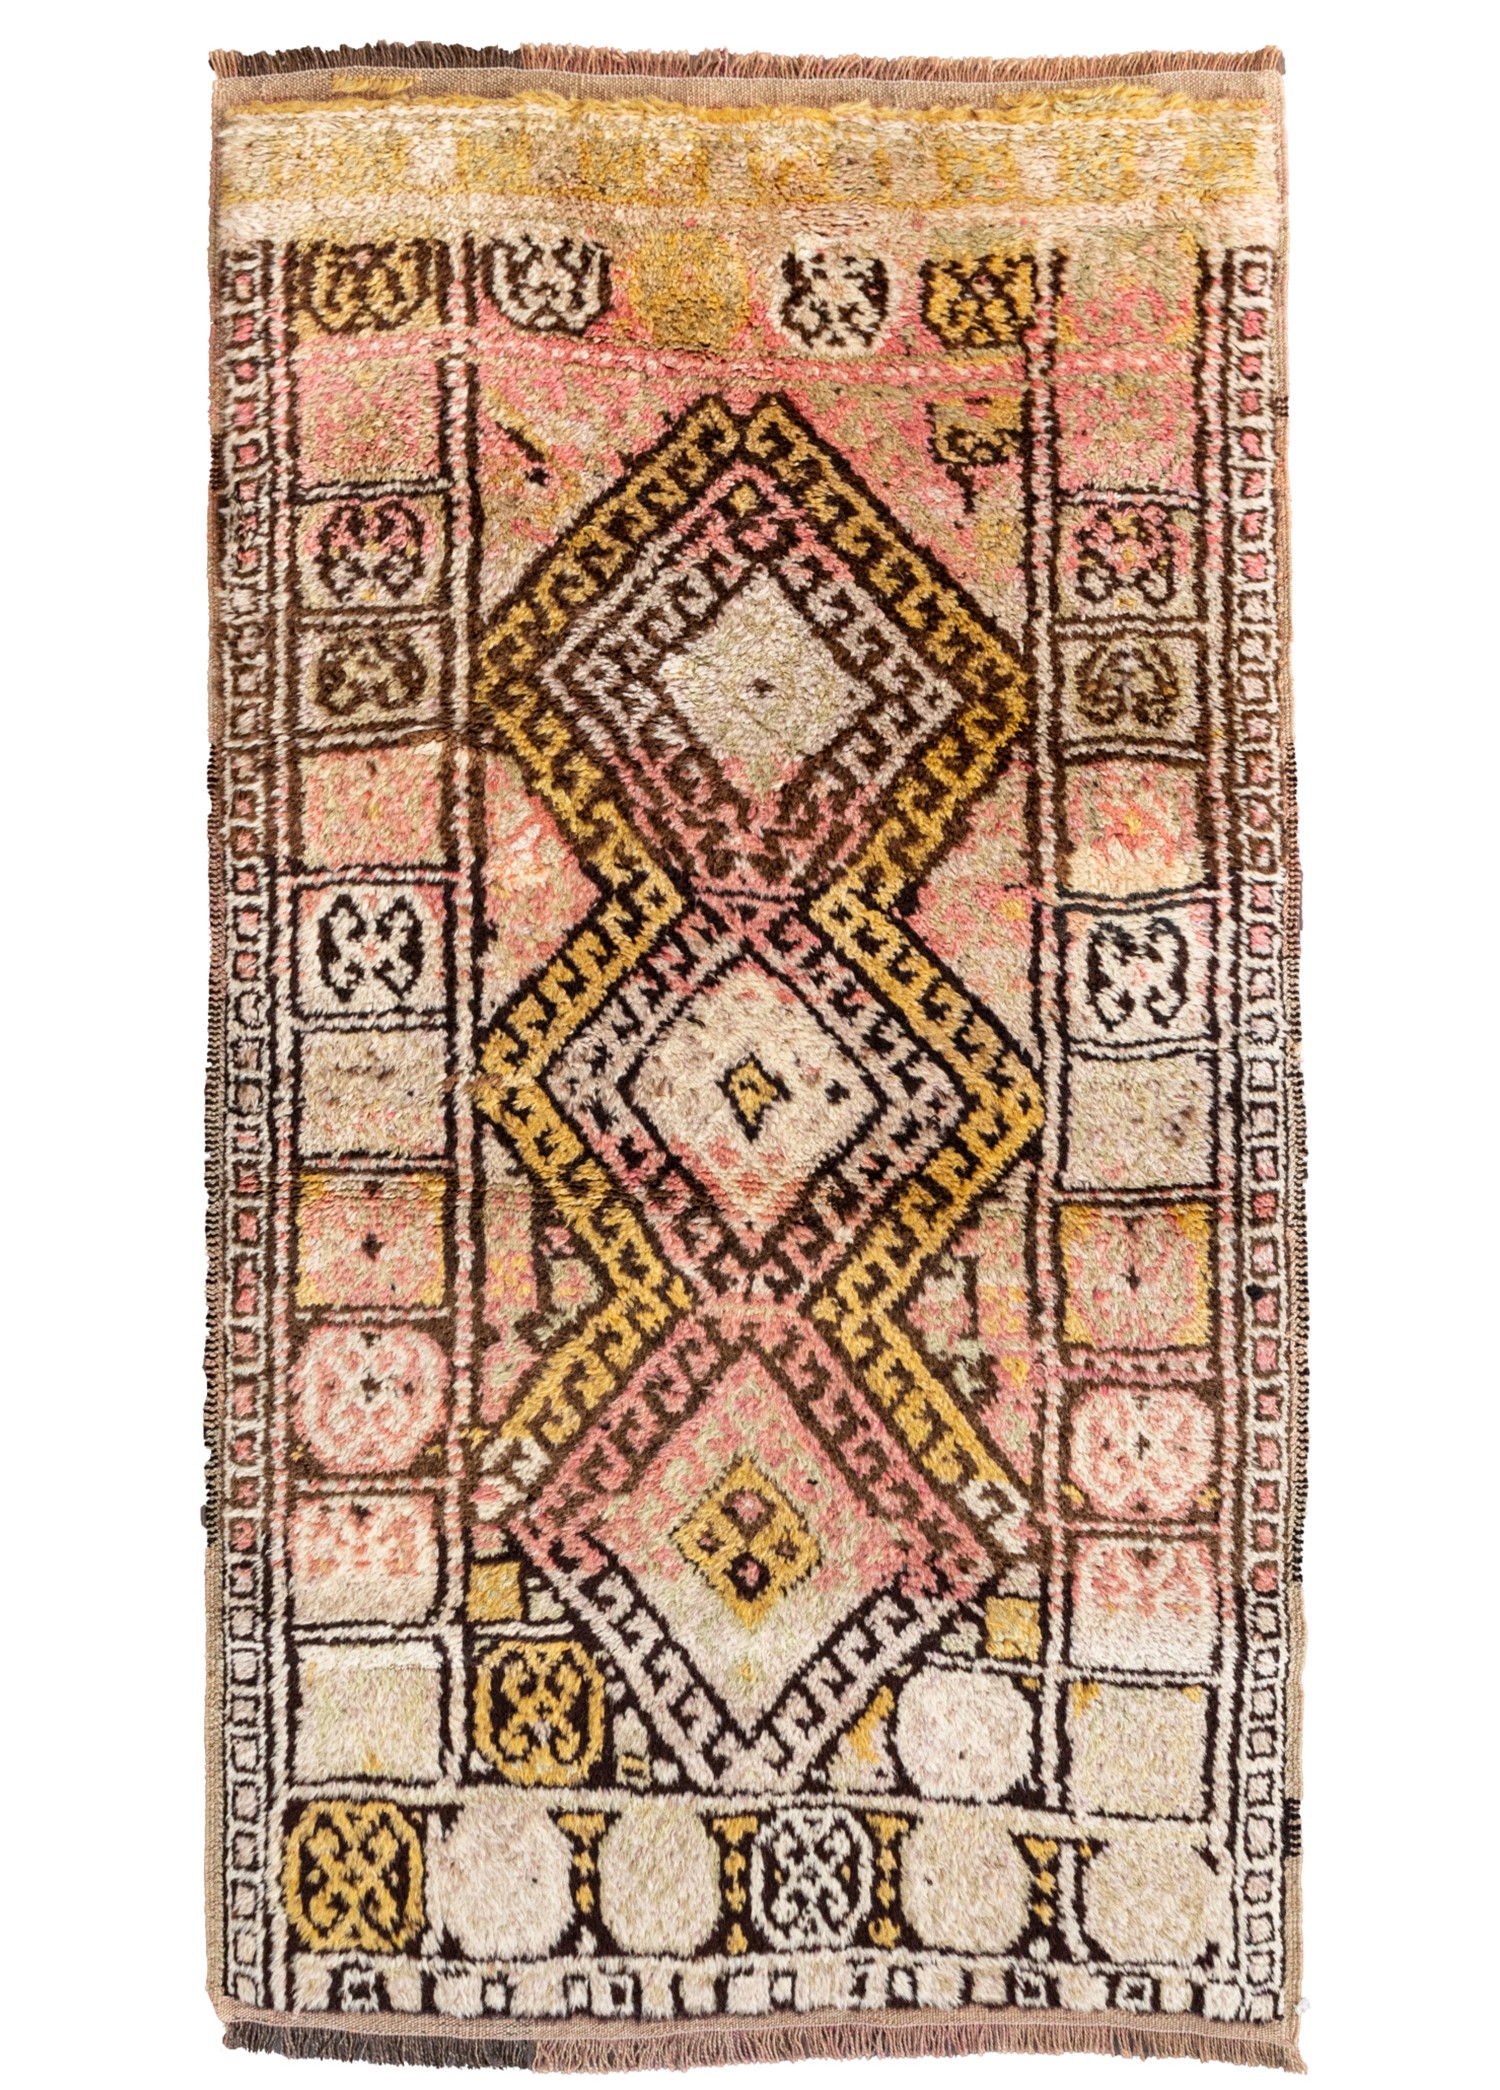 Edith Ethnic Patterned Hand Woven Wool Carpet 98x167 cm